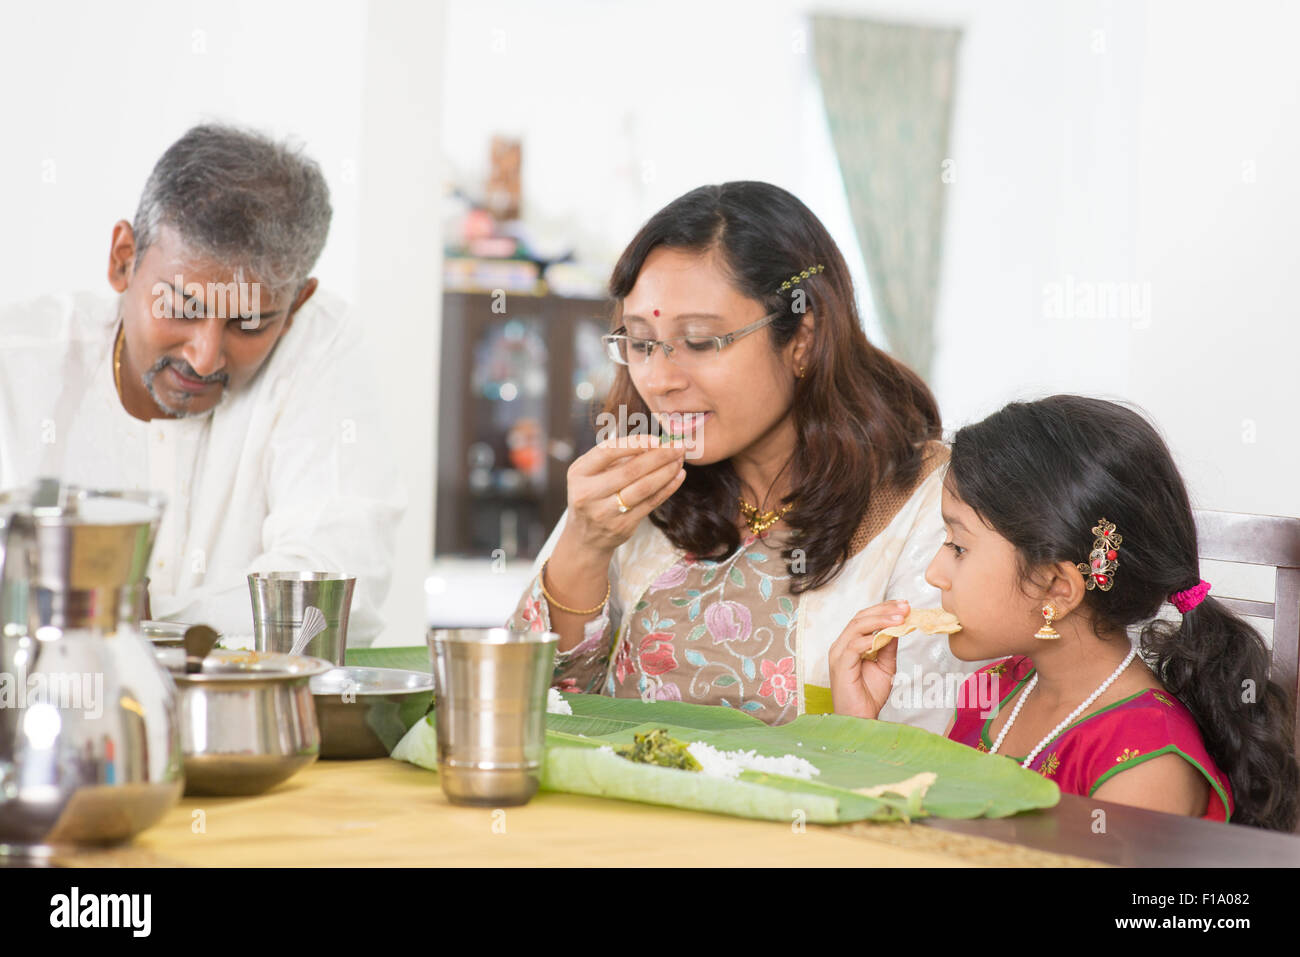 Indian family dining at home. Candid photo of India people eating rice with hands. Asian culture. Stock Photo